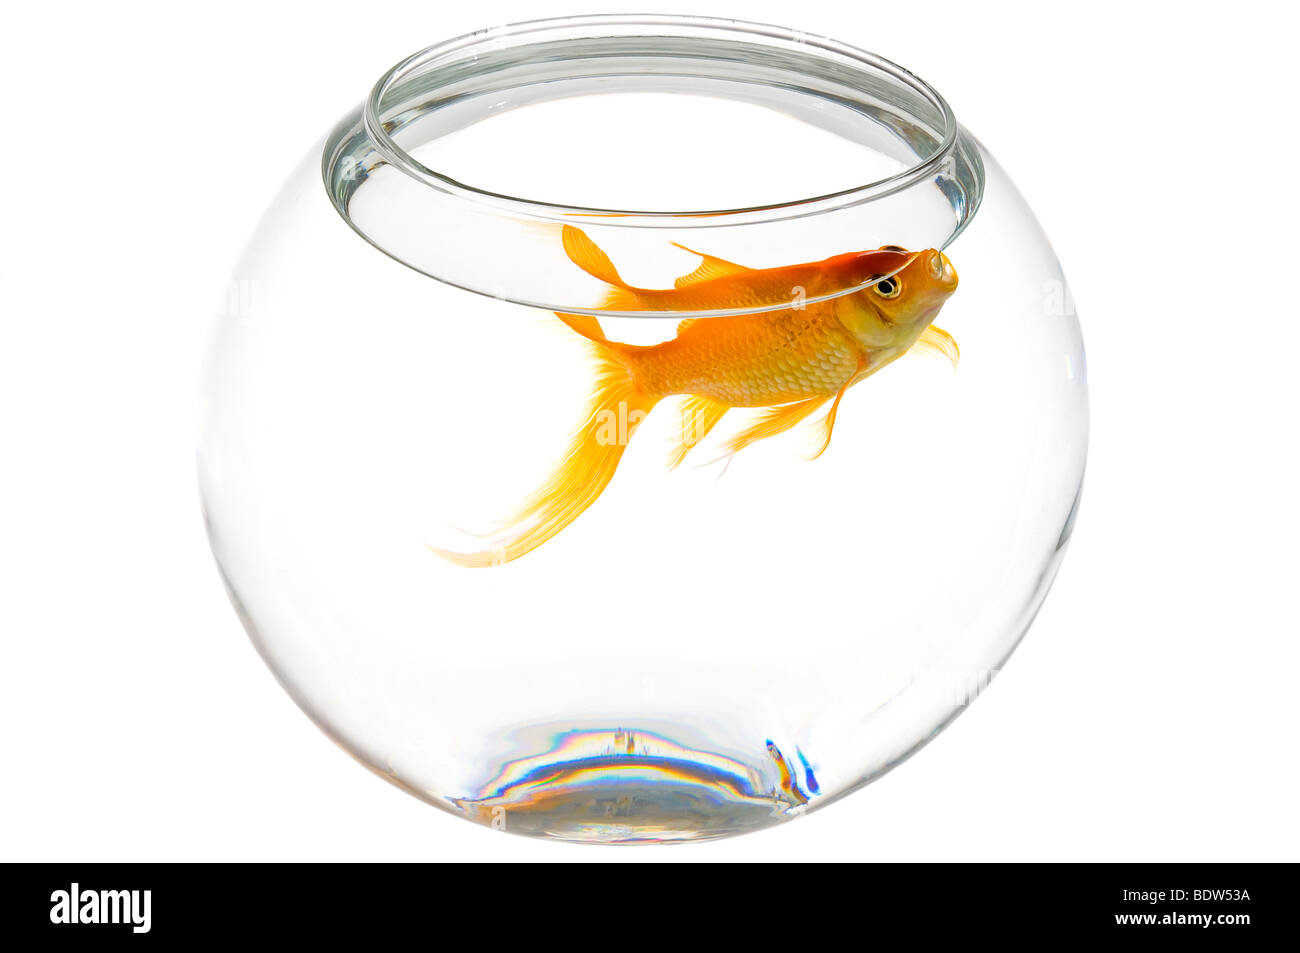 Horizontal elevated close up of a bright orange goldfish (Carassius auratus) at the top of a round fish bowl on white background Stock Photo